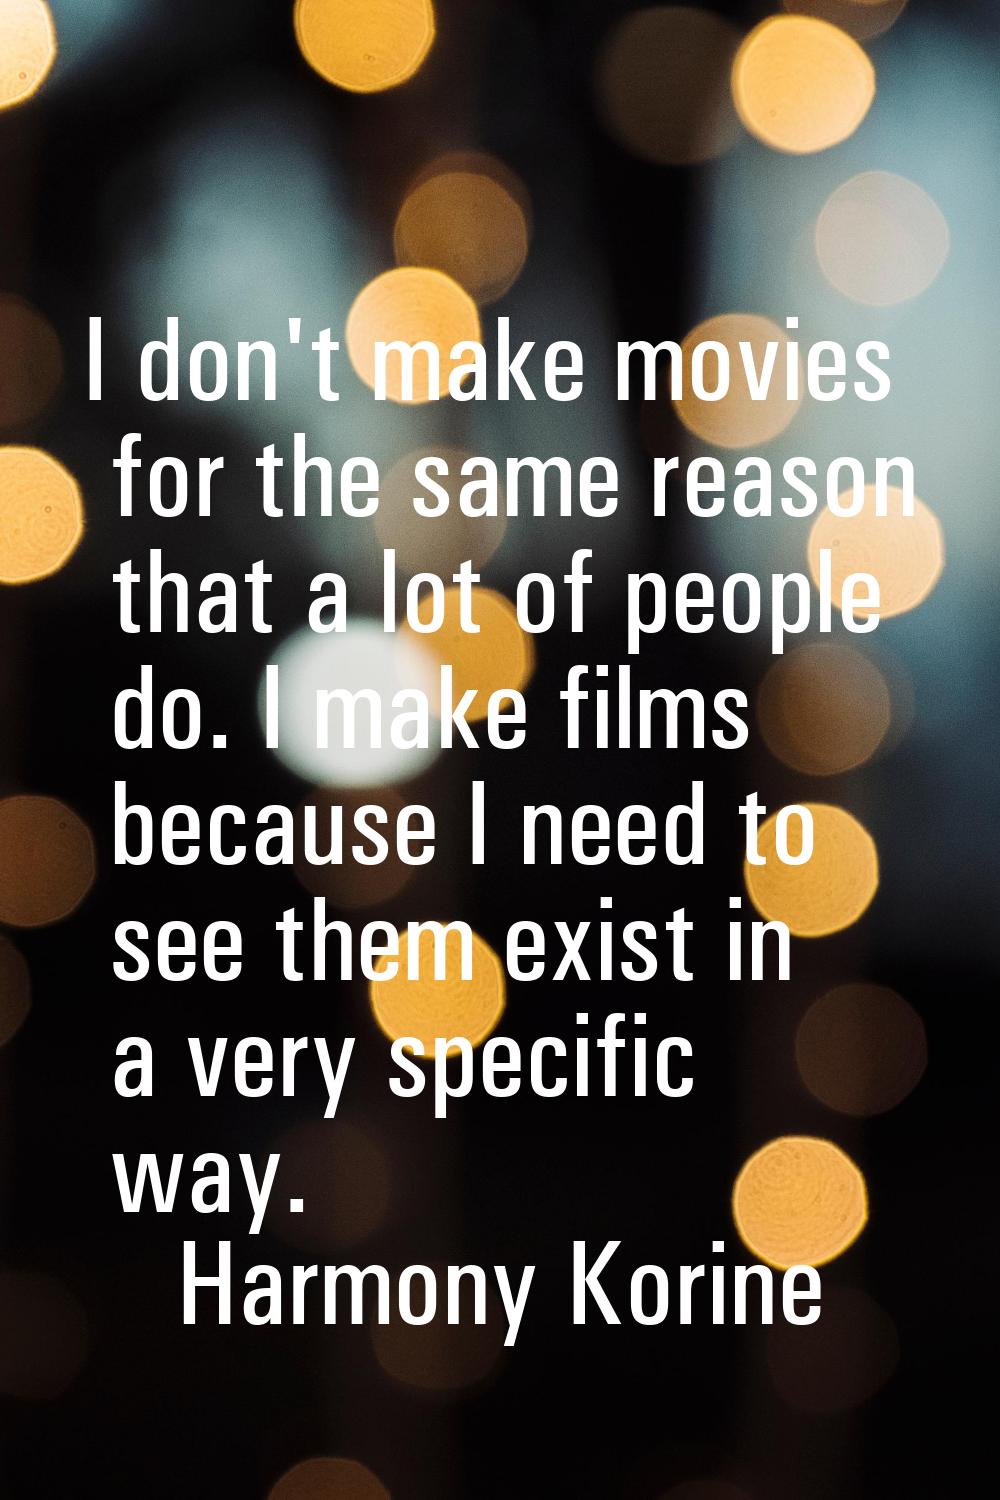 I don't make movies for the same reason that a lot of people do. I make films because I need to see